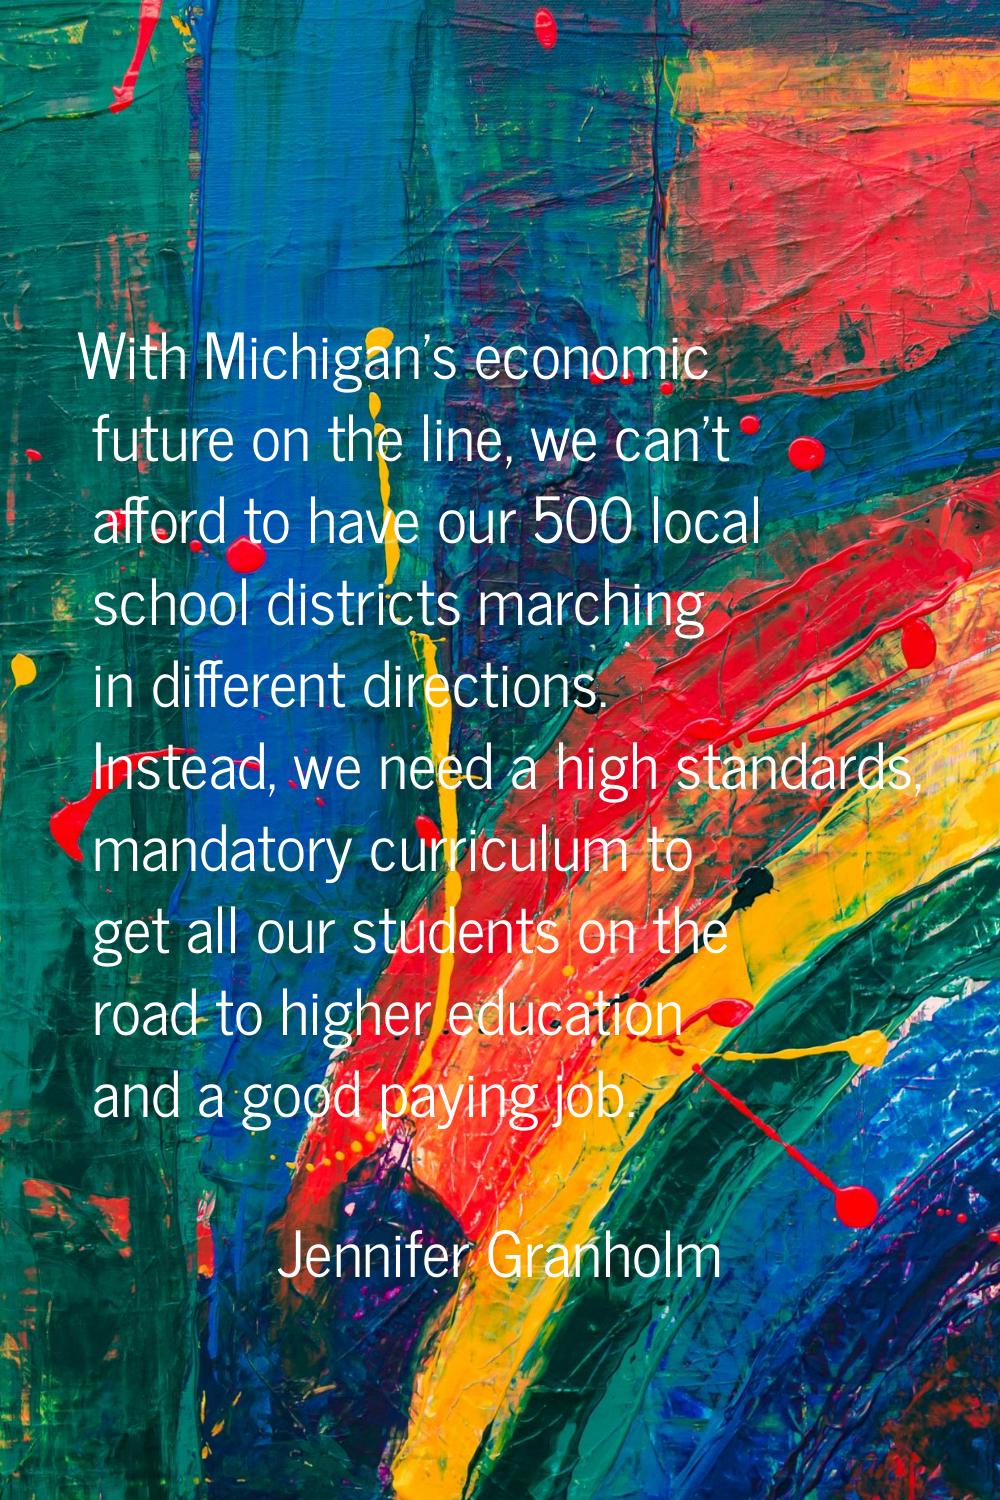 With Michigan's economic future on the line, we can't afford to have our 500 local school districts